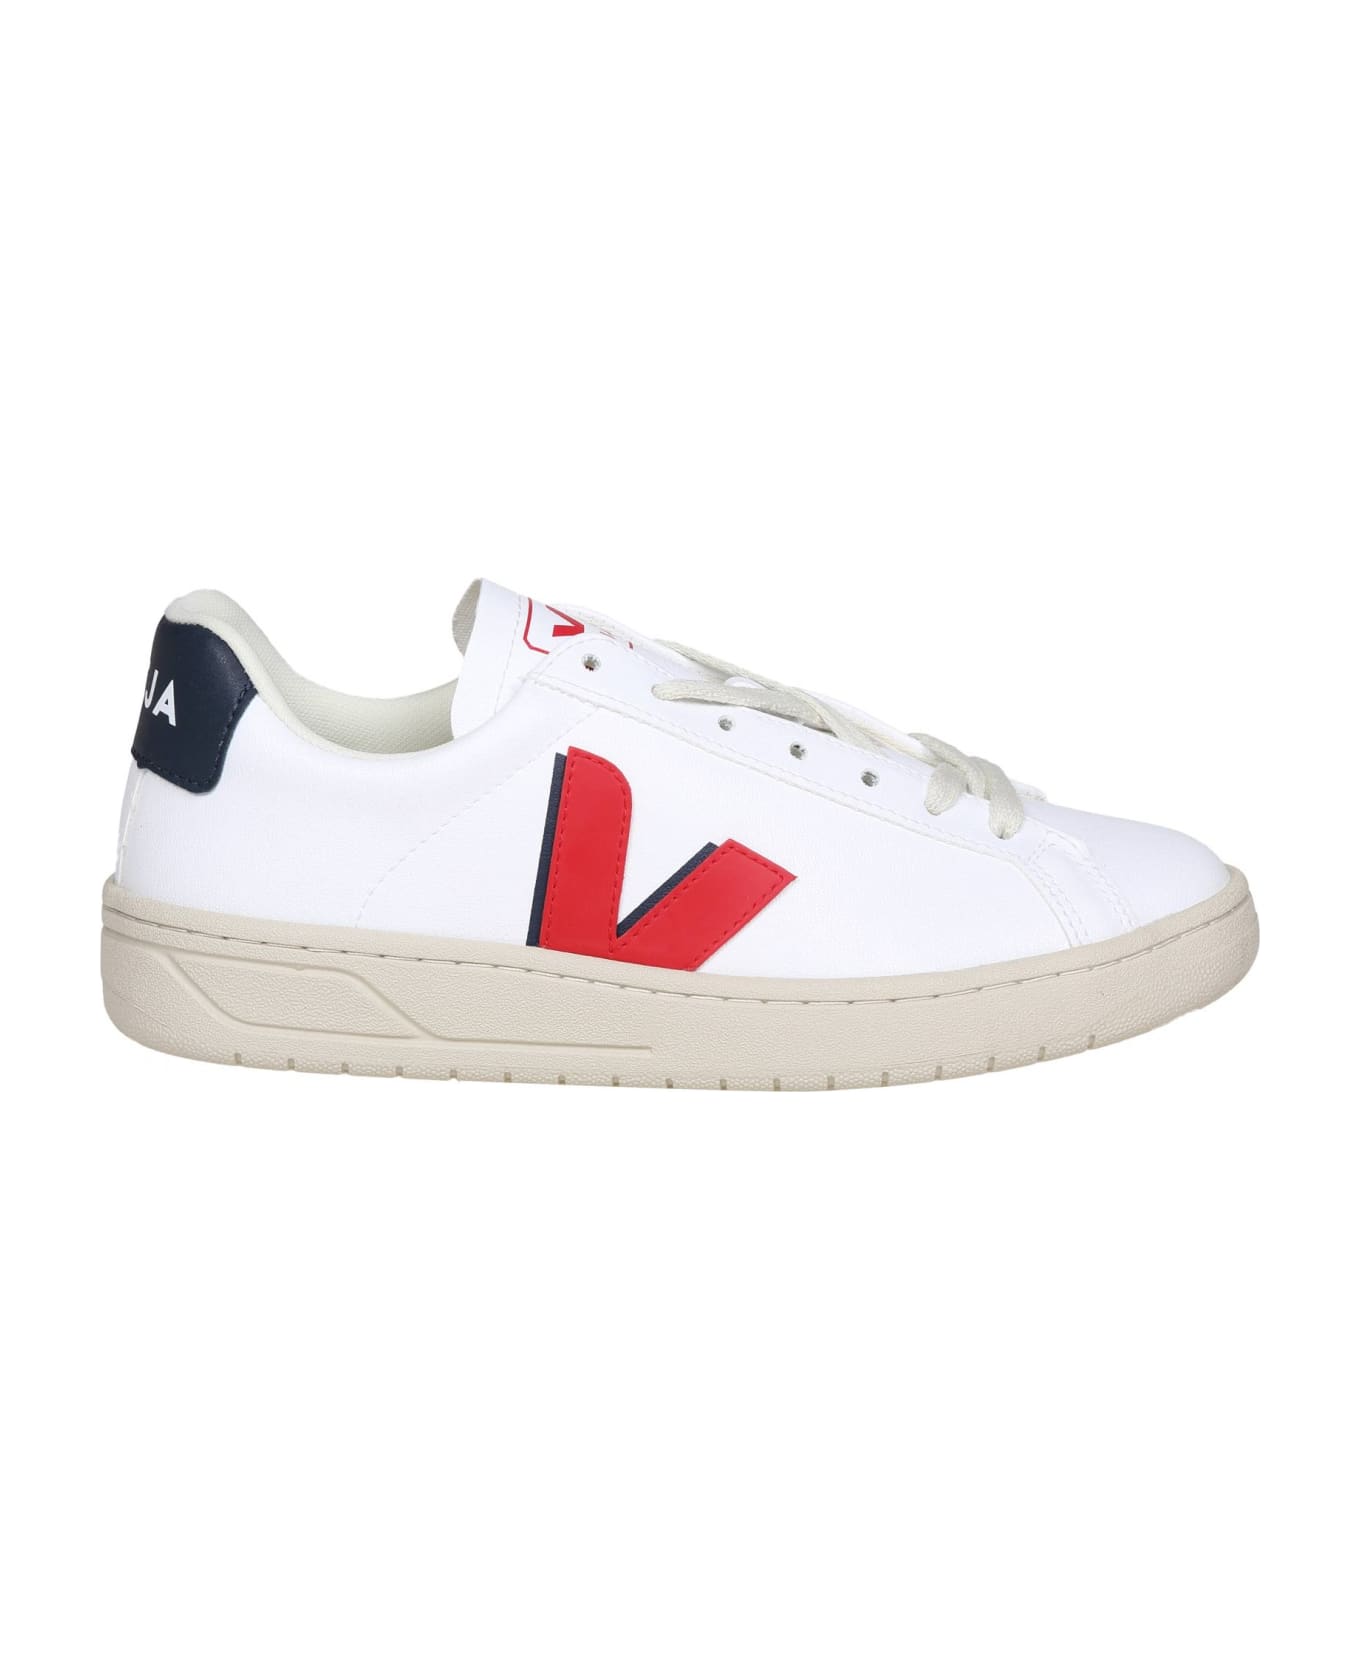 Veja Campo Chromefree In White/red Leather - White/red スニーカー